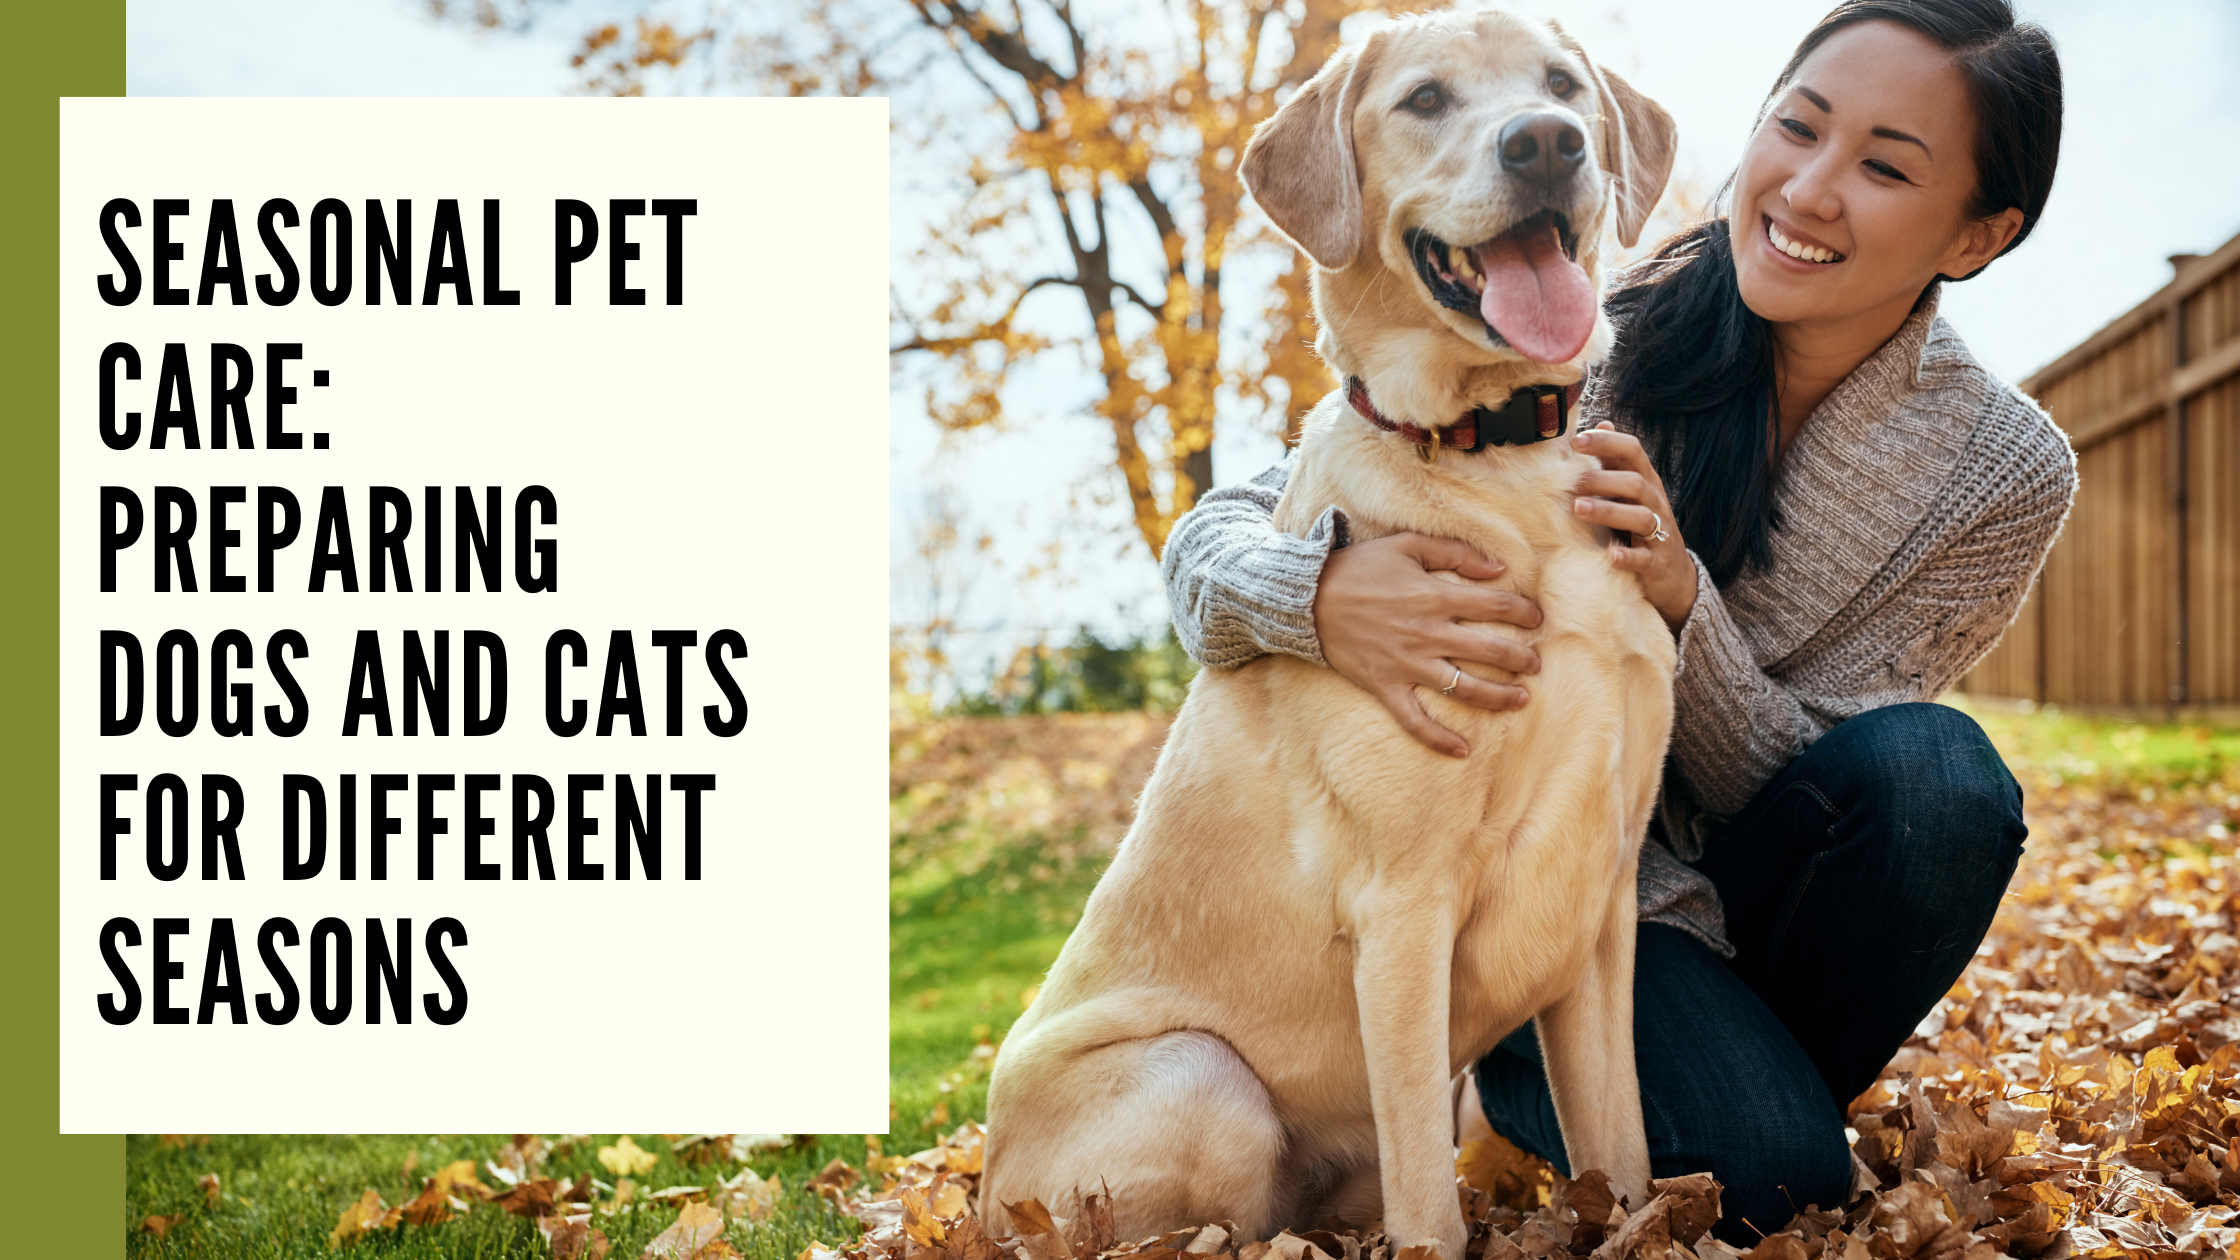 Seasonal Pet Care Preparing Dogs and Cats for Different Seasons